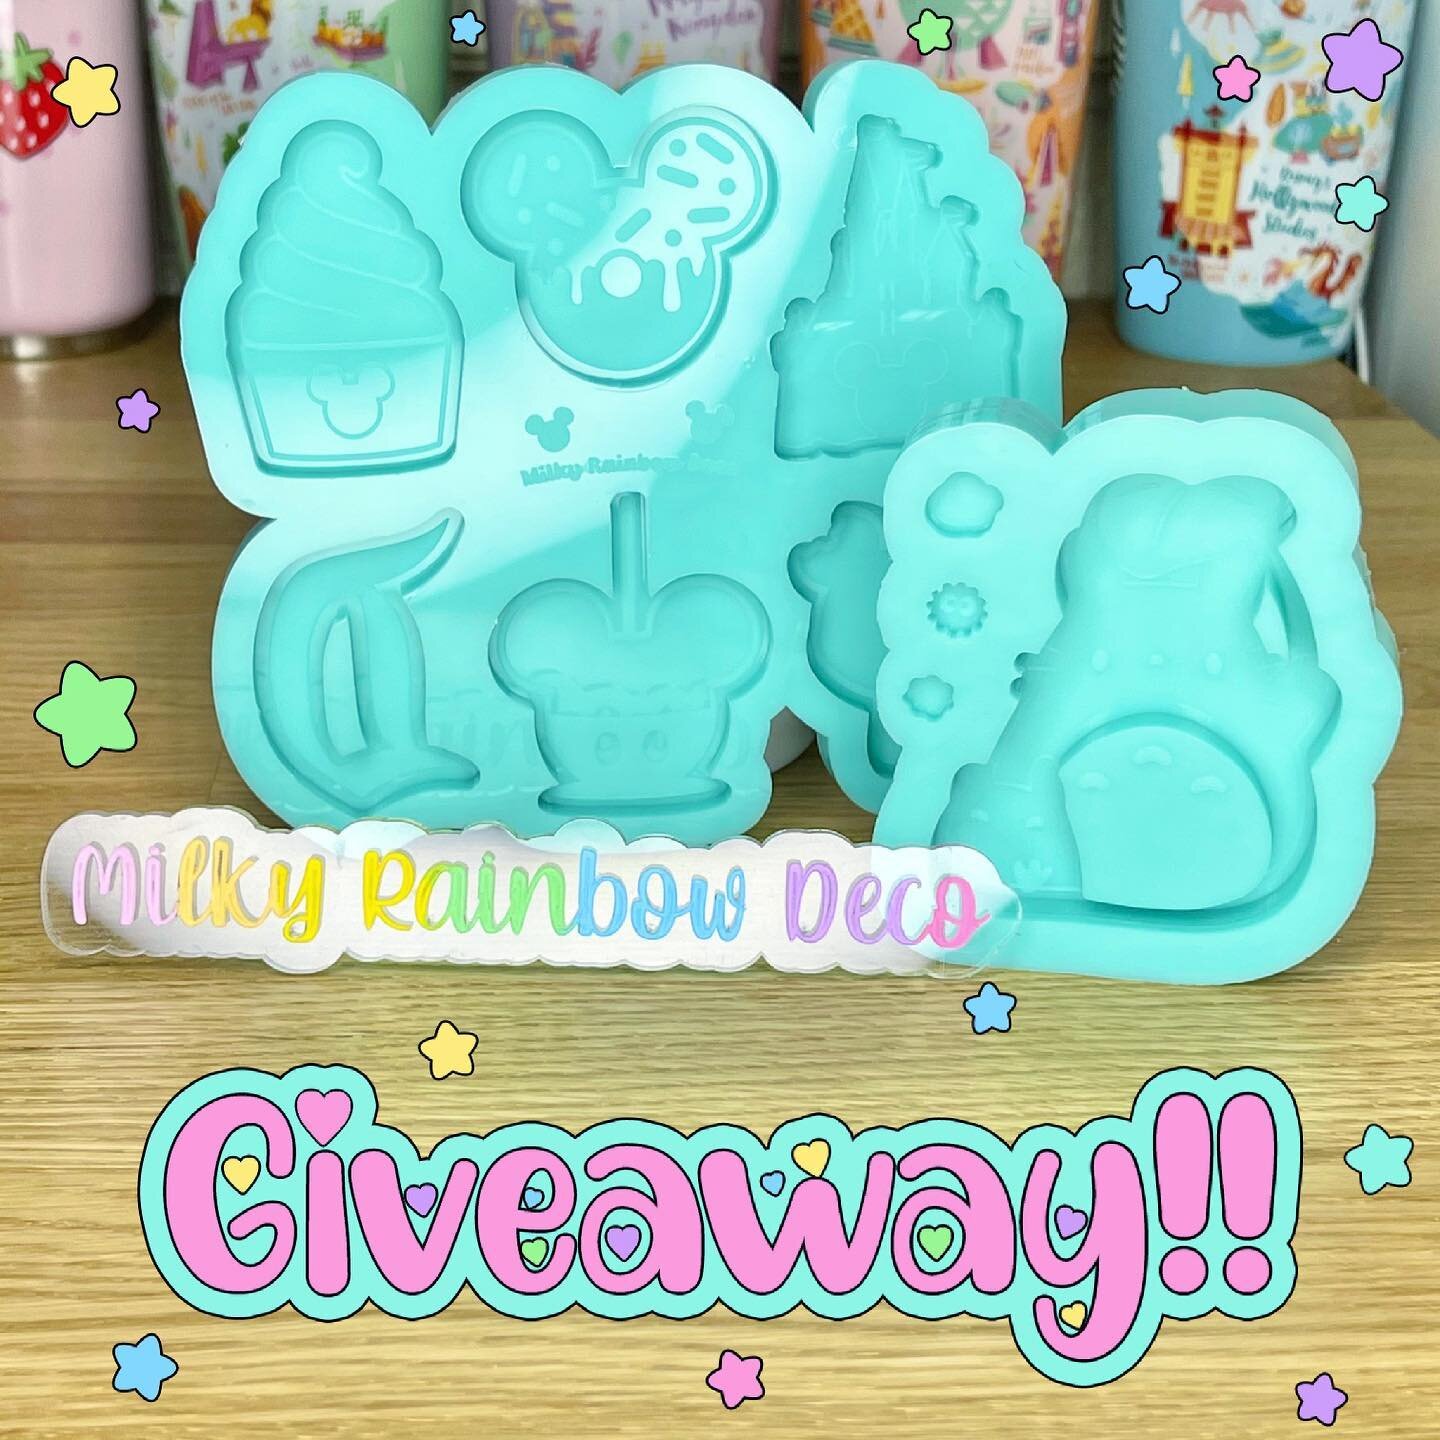 ❌Congrats to the winner @twistedpeony ❌As promised, my birthday giveaway! The winner will win 2 molds of their choice and a custom watermark! 💗
To enter:
-Follow me!
-Like this photo
-And tag your friends in the comments!
Please only one tag per com